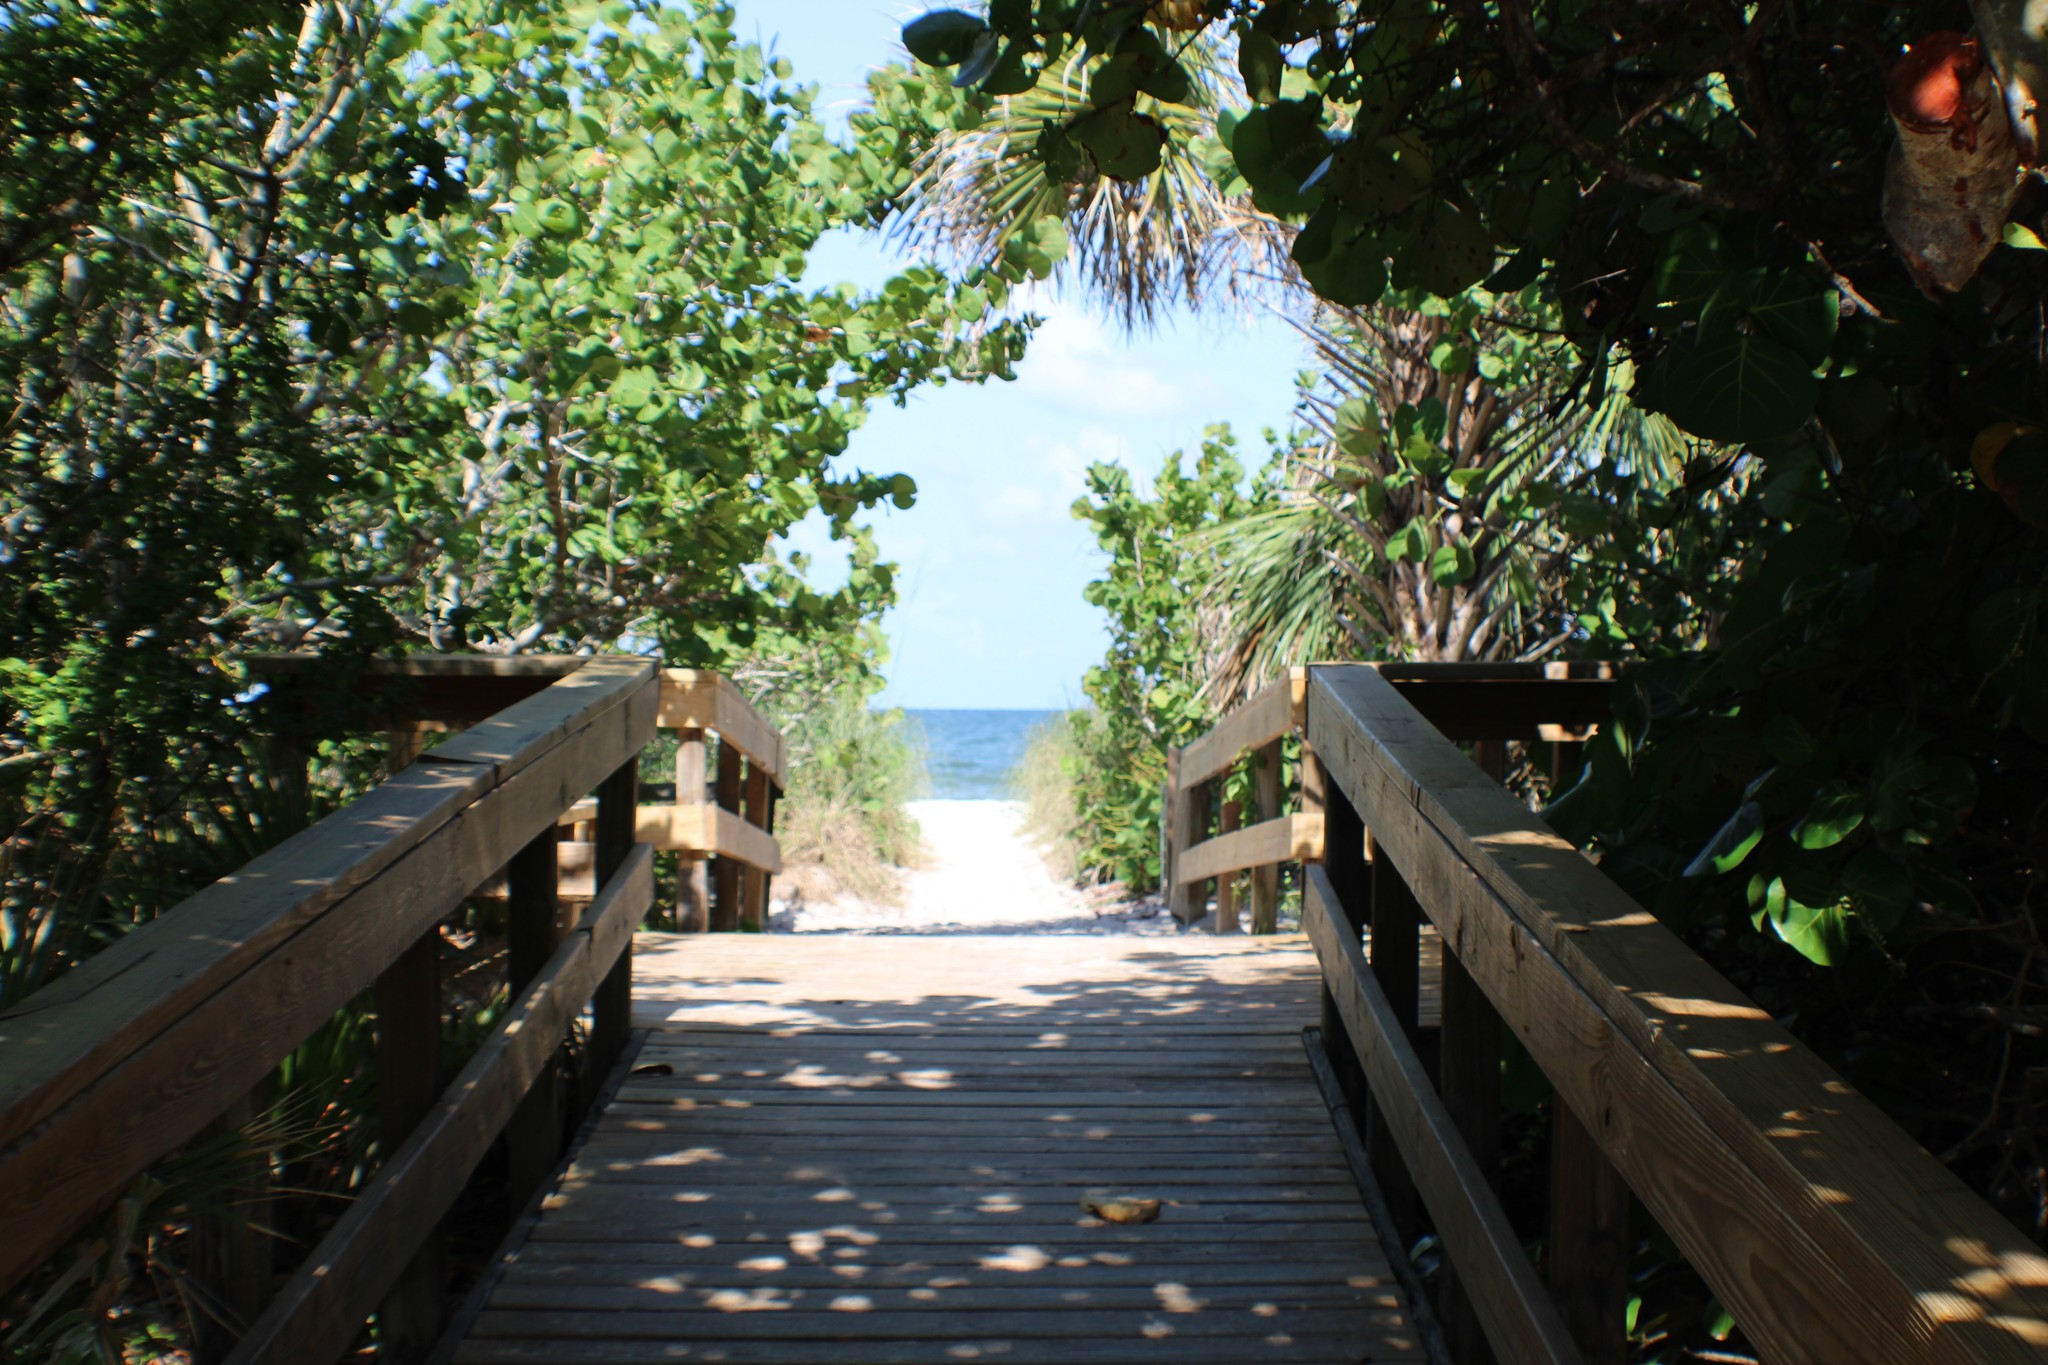 The Best of Beauty and Self-Care in Naples, Florida